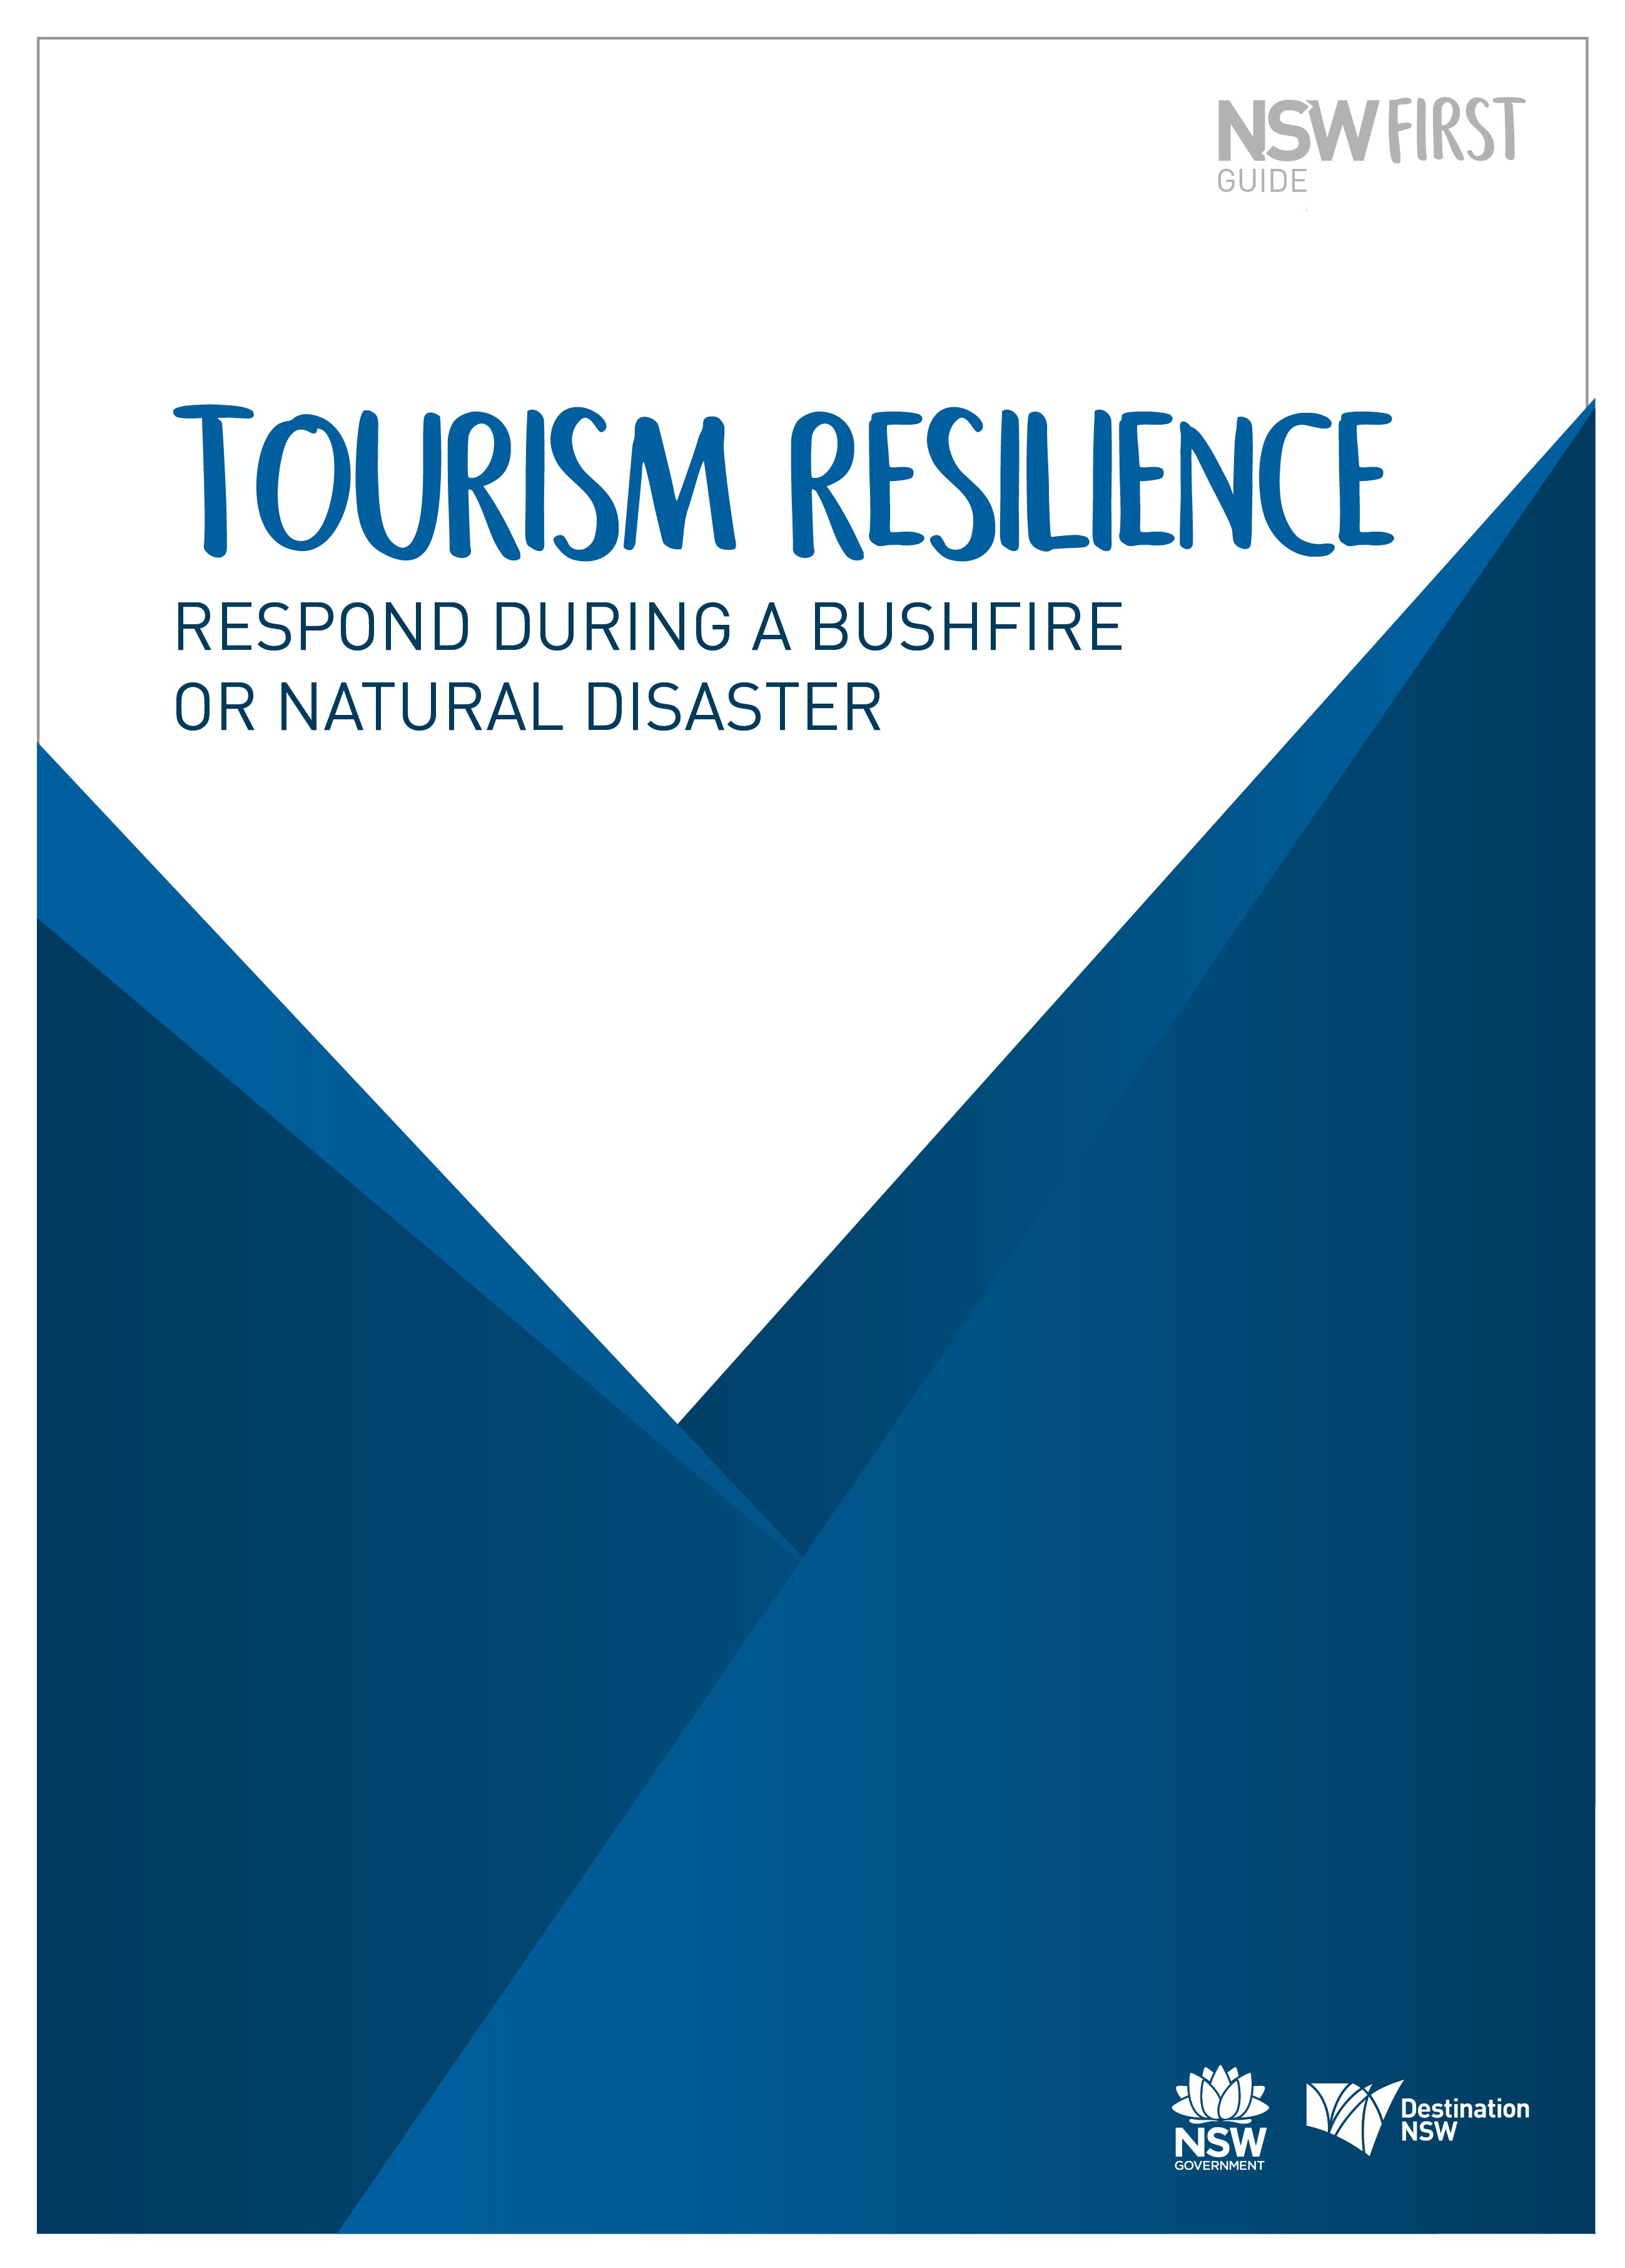 DNSW Tourism Resilience Guides